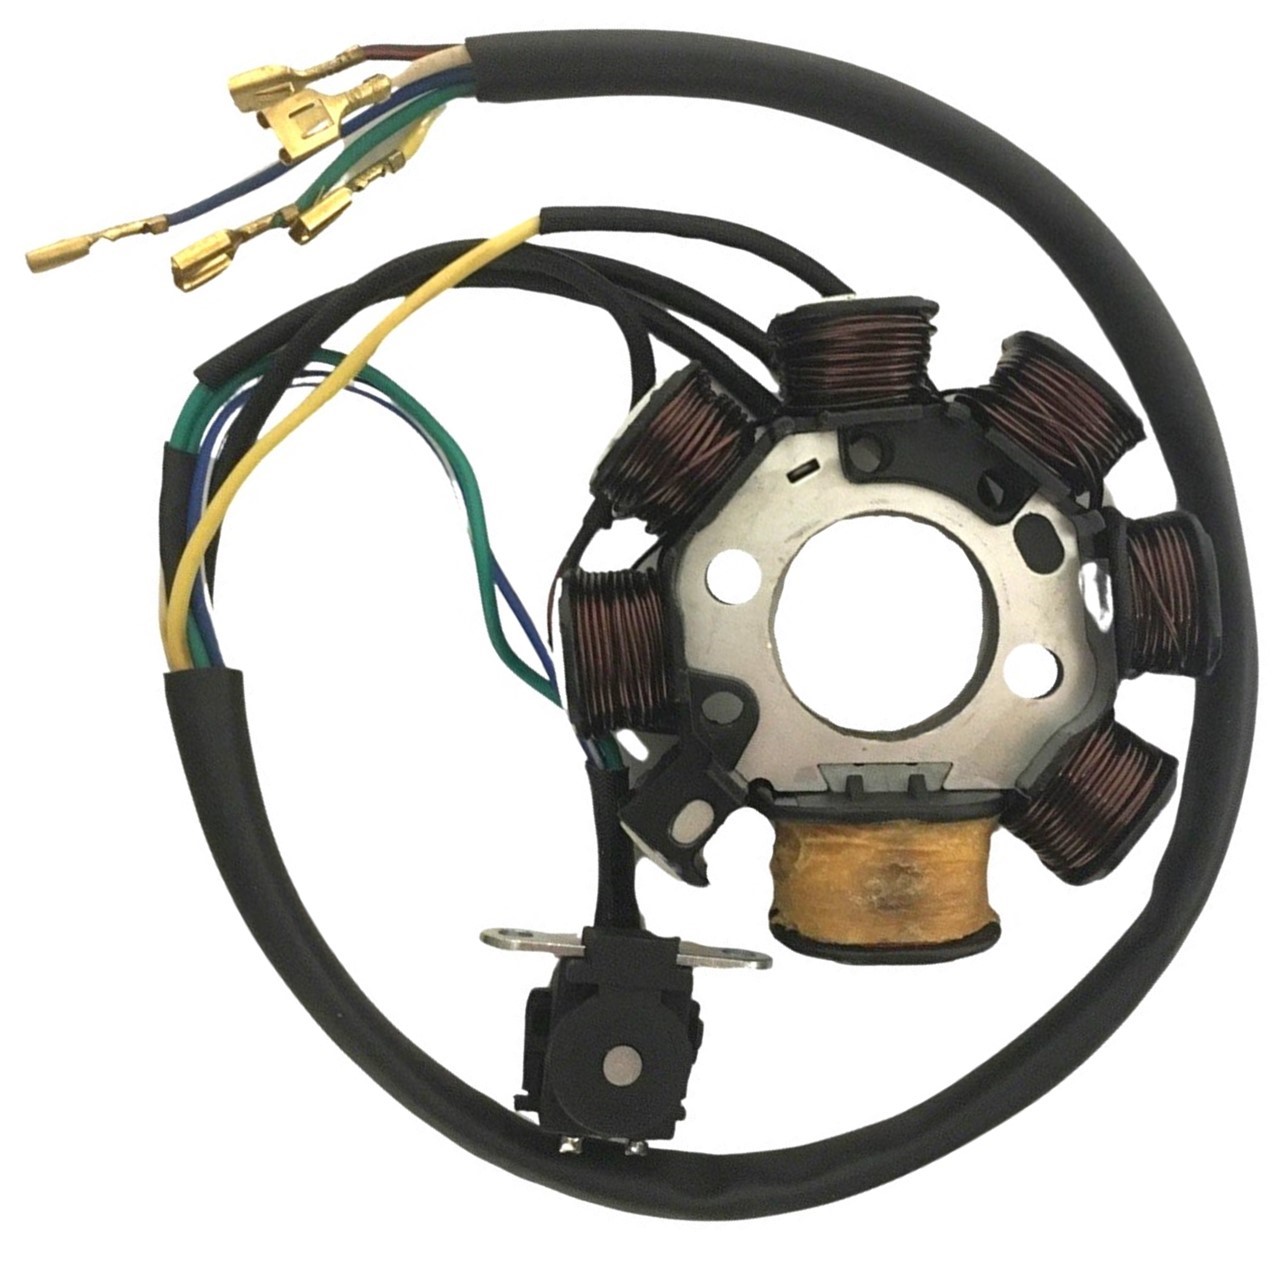 STATOR 90-125cc Fits many Chinese ATVs, Dirt Bikes 8 Pole - 7 Coils + 1 Open 5 Wires - No Jack OD=84 ID=29 H=26 Bolts c/c=40